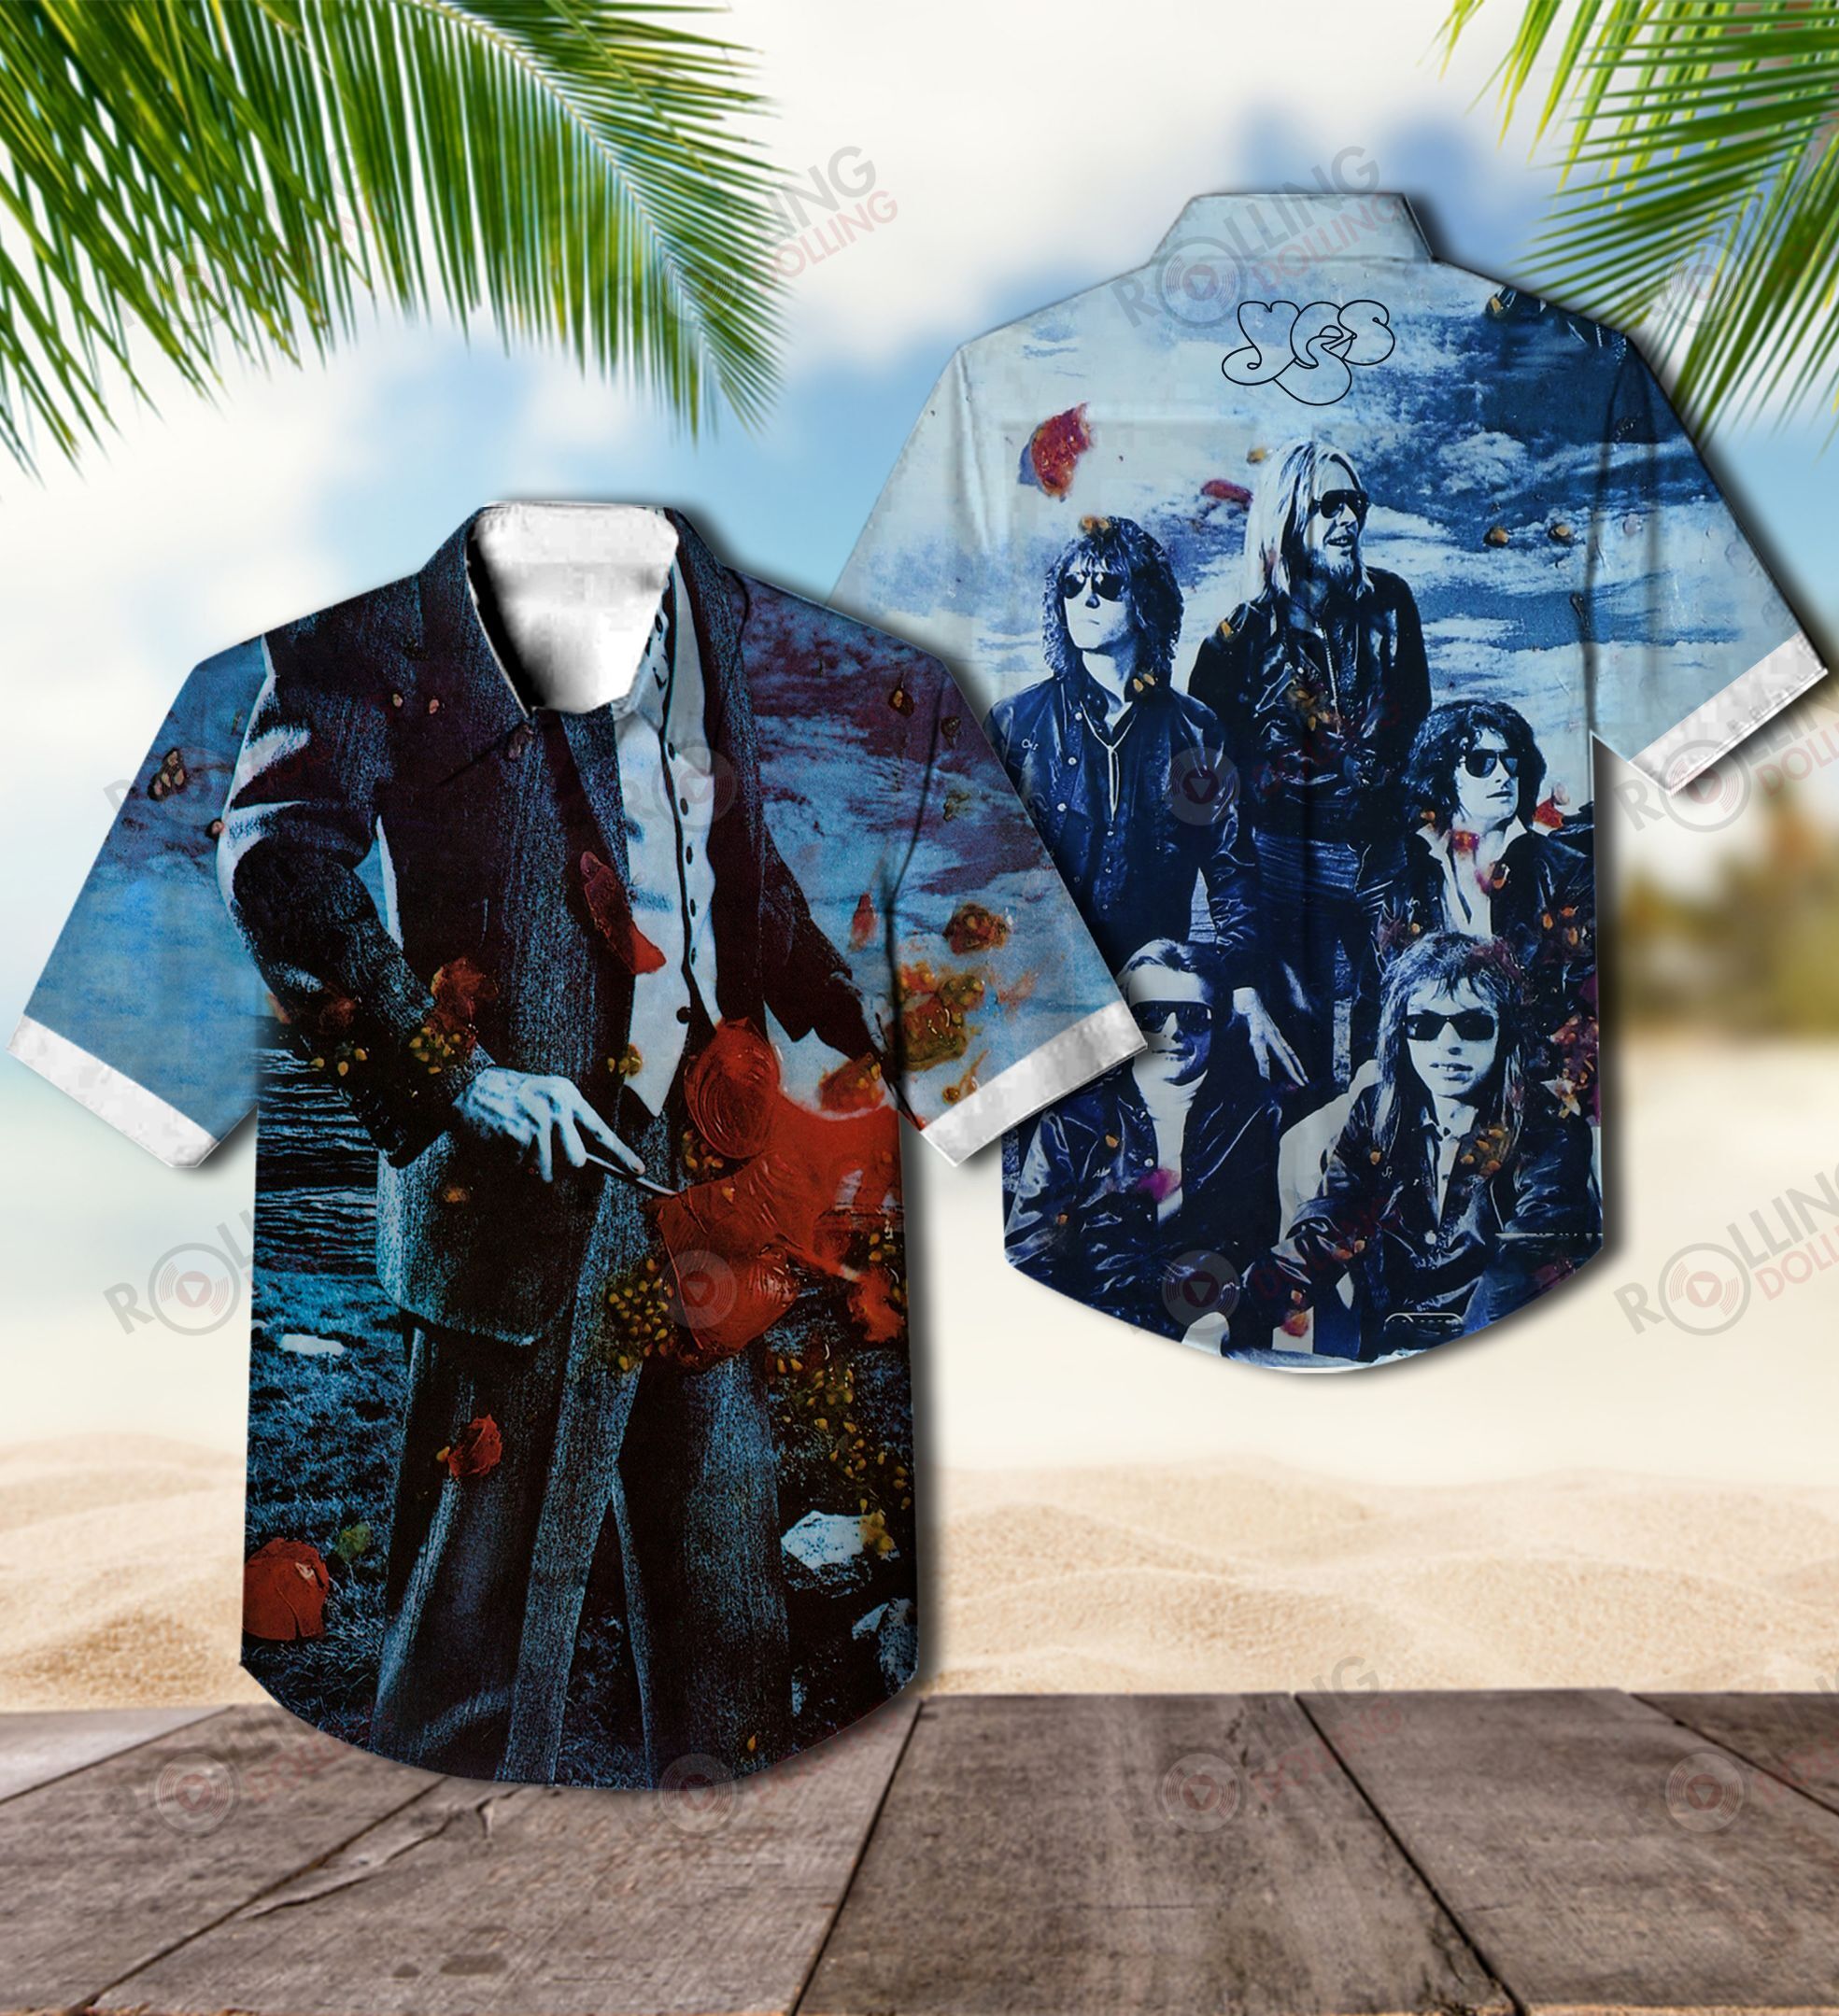 You'll have the perfect vacation outfit with this Hawaiian shirt 345